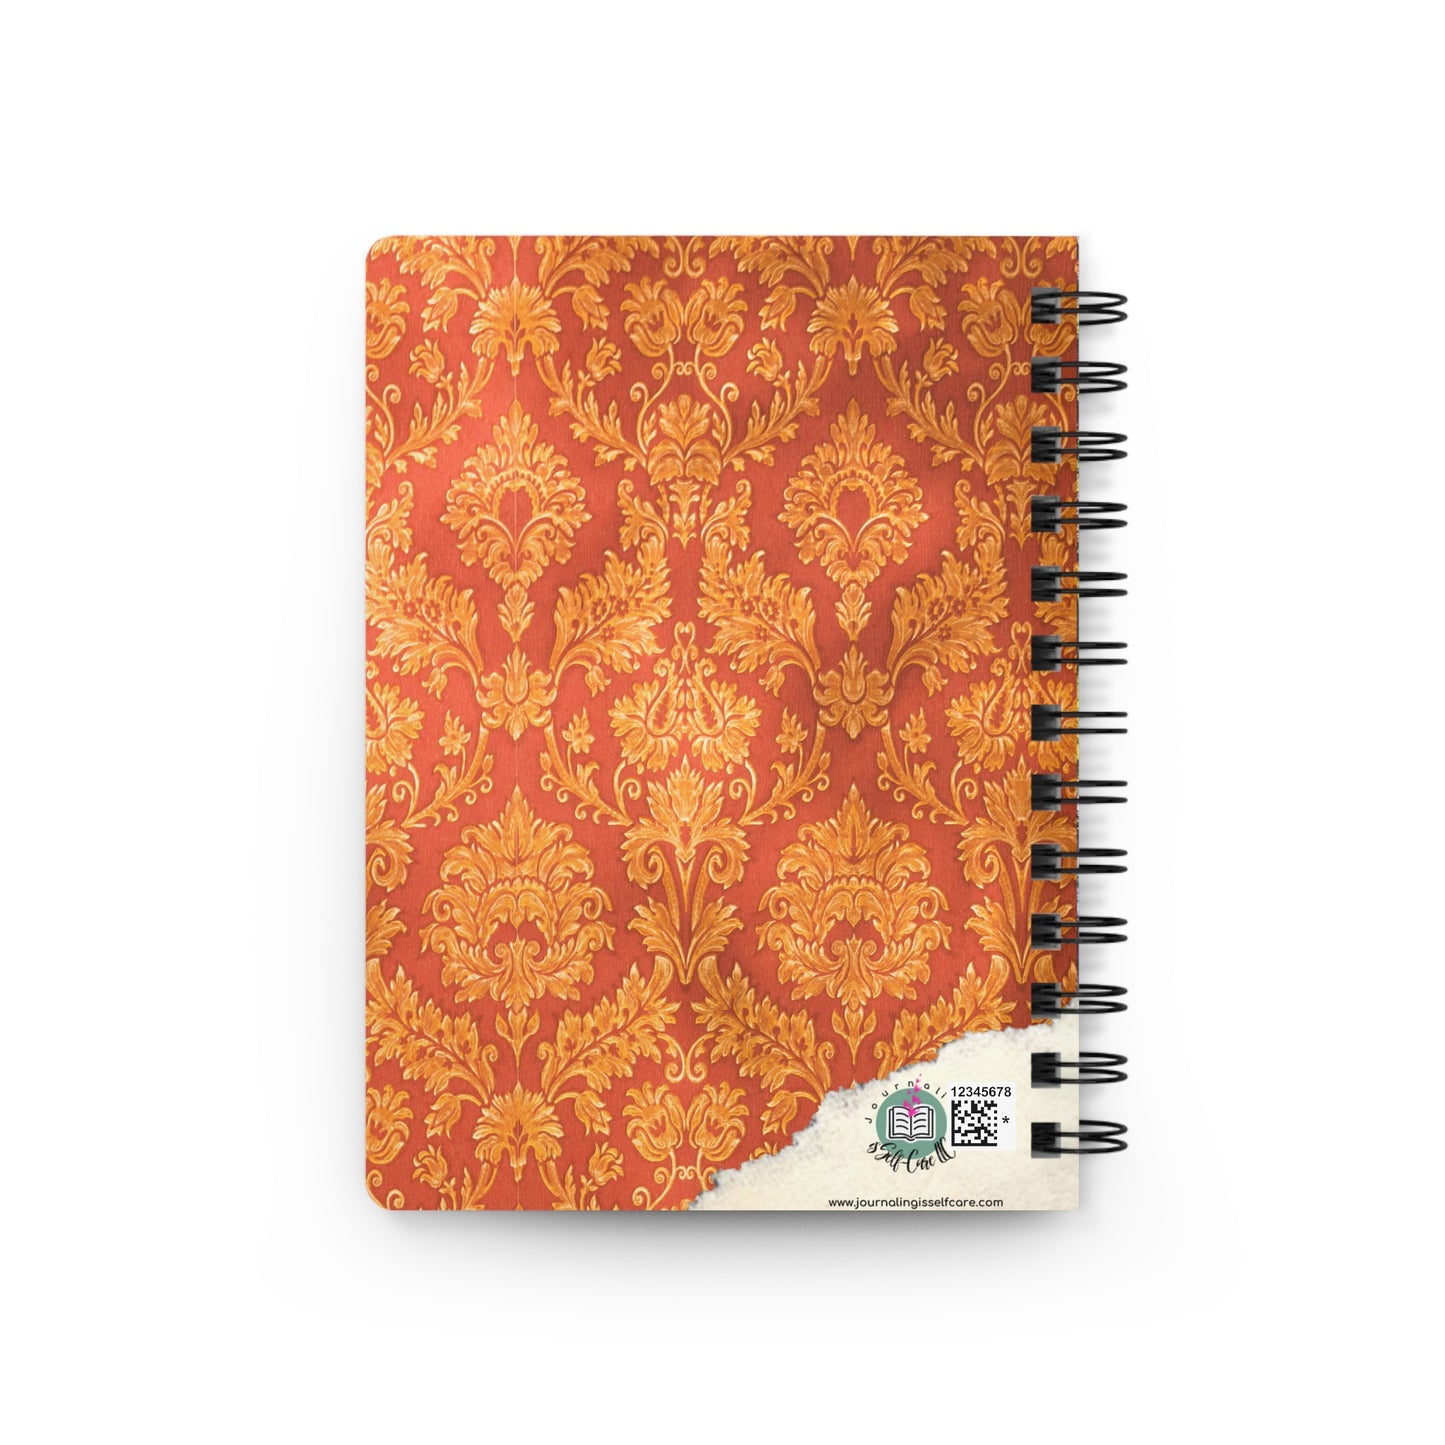 A Trust Your Magic "Spellbook" with an orange and gold damask pattern.